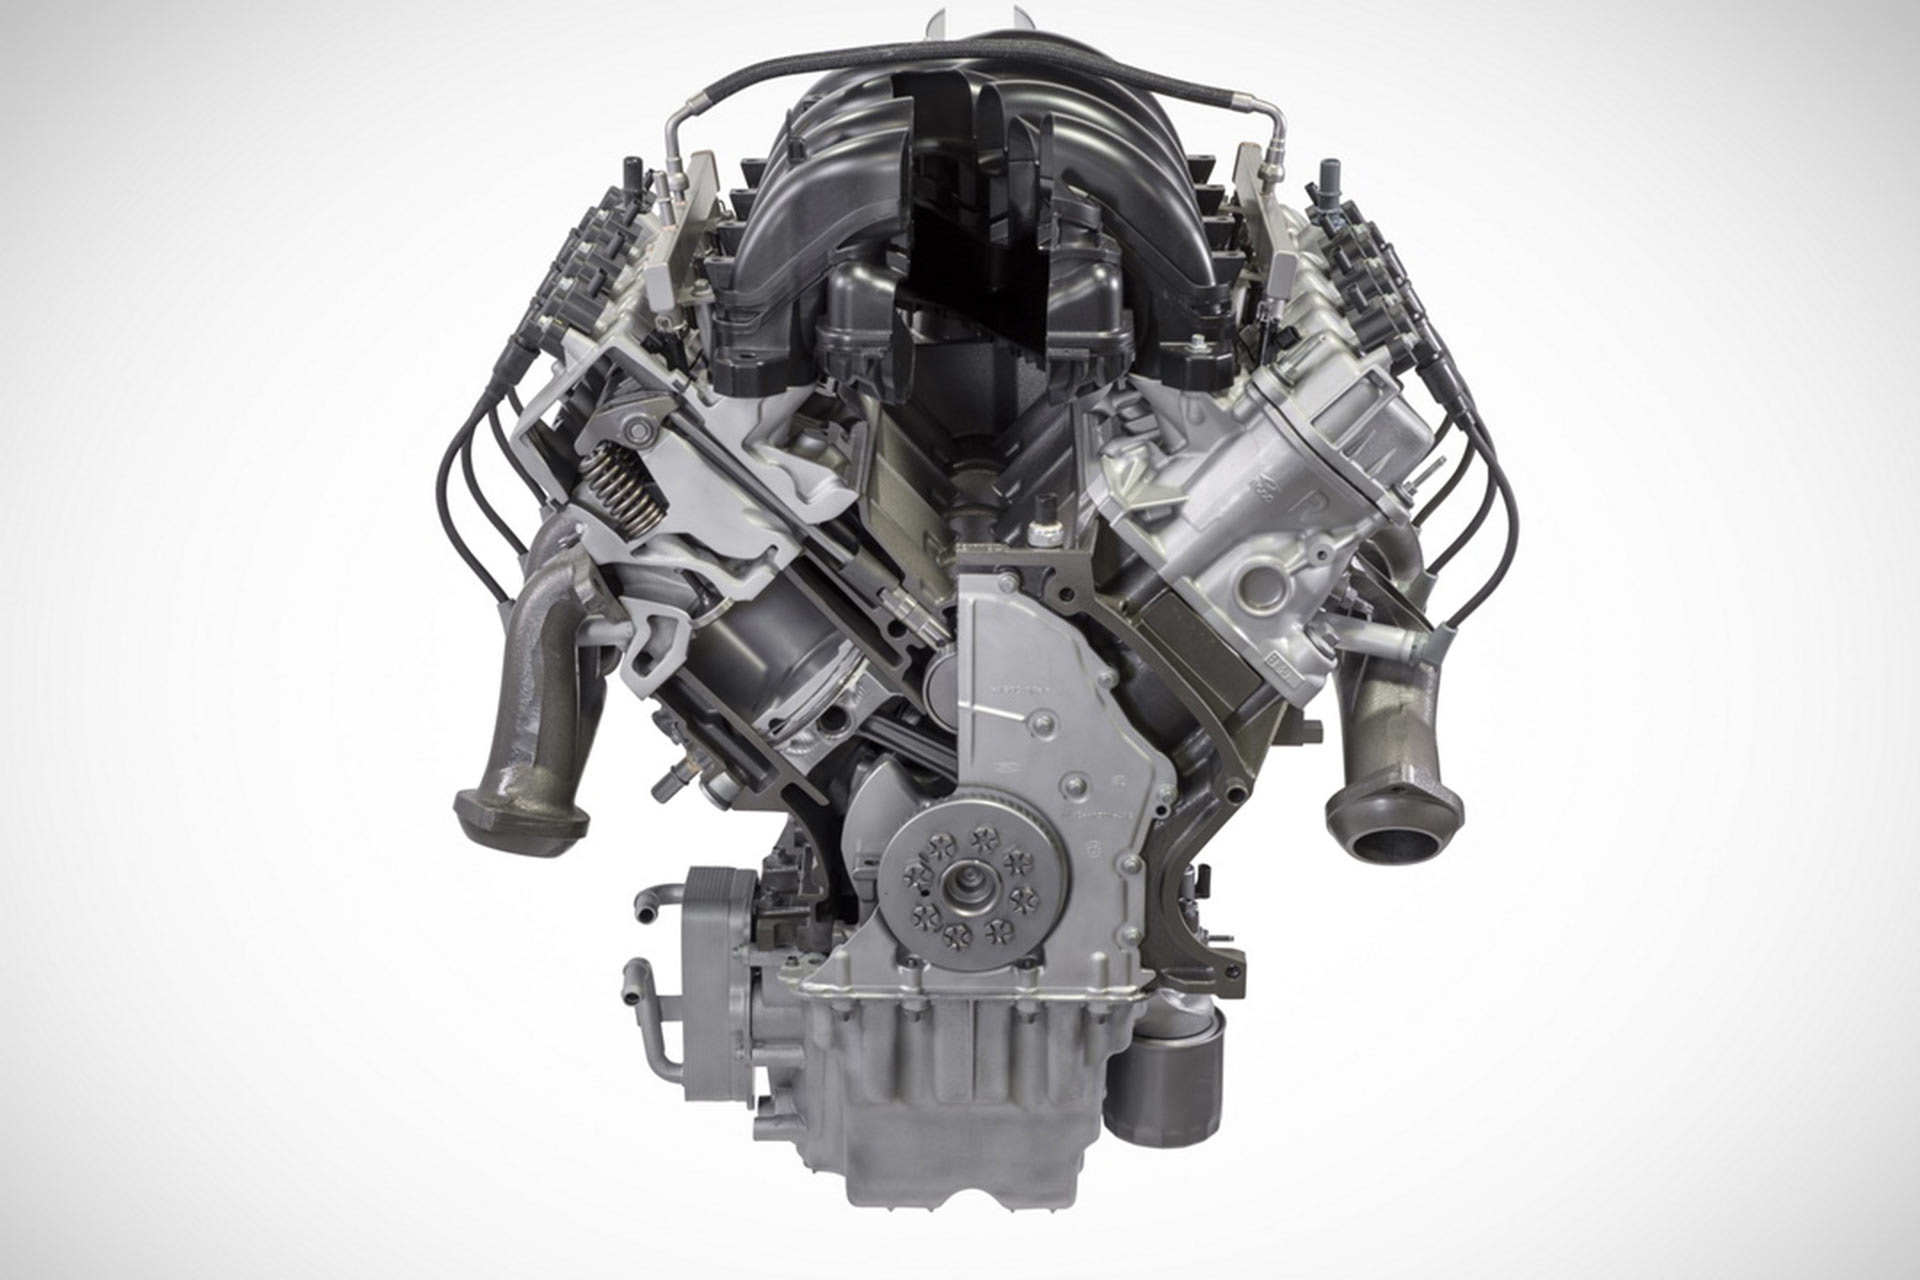 Godzilla, Anyone? Ford Performance Now Has The 7.3-Liter Gas V8